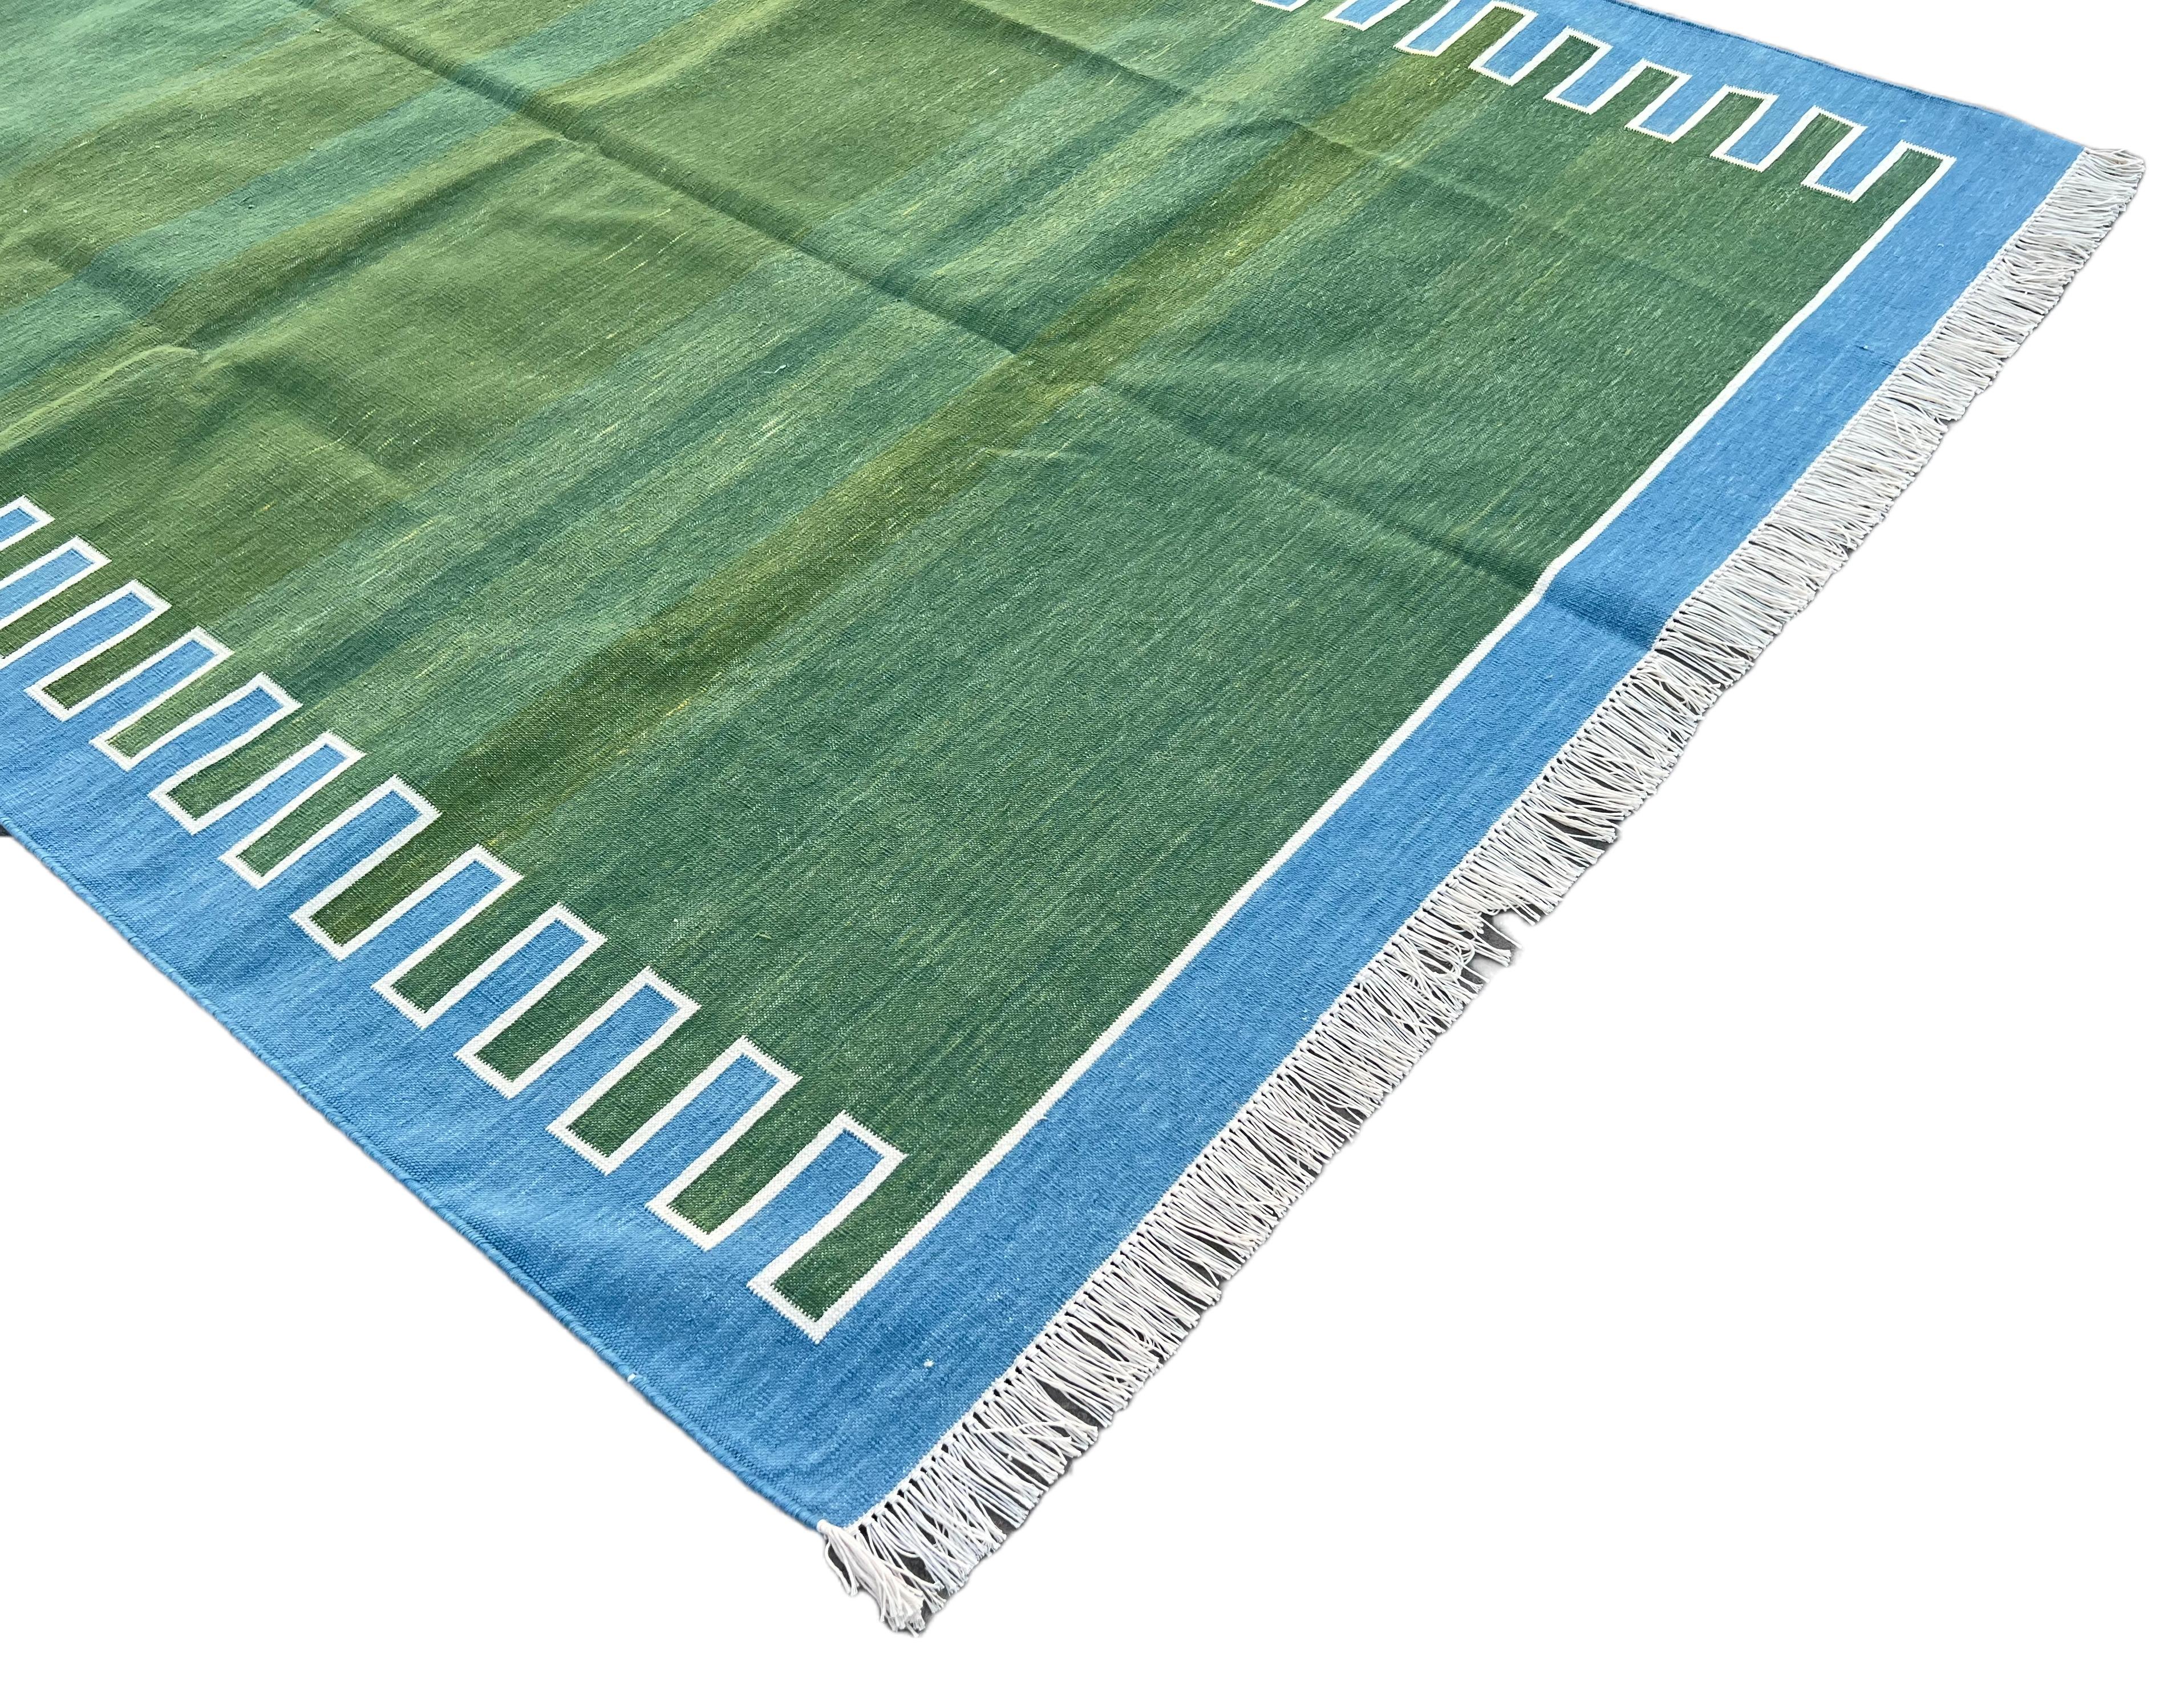 Hand-Woven Handmade Cotton Area Flat Weave Rug, 5x7 Green And Blue Striped Indian Dhurrie For Sale